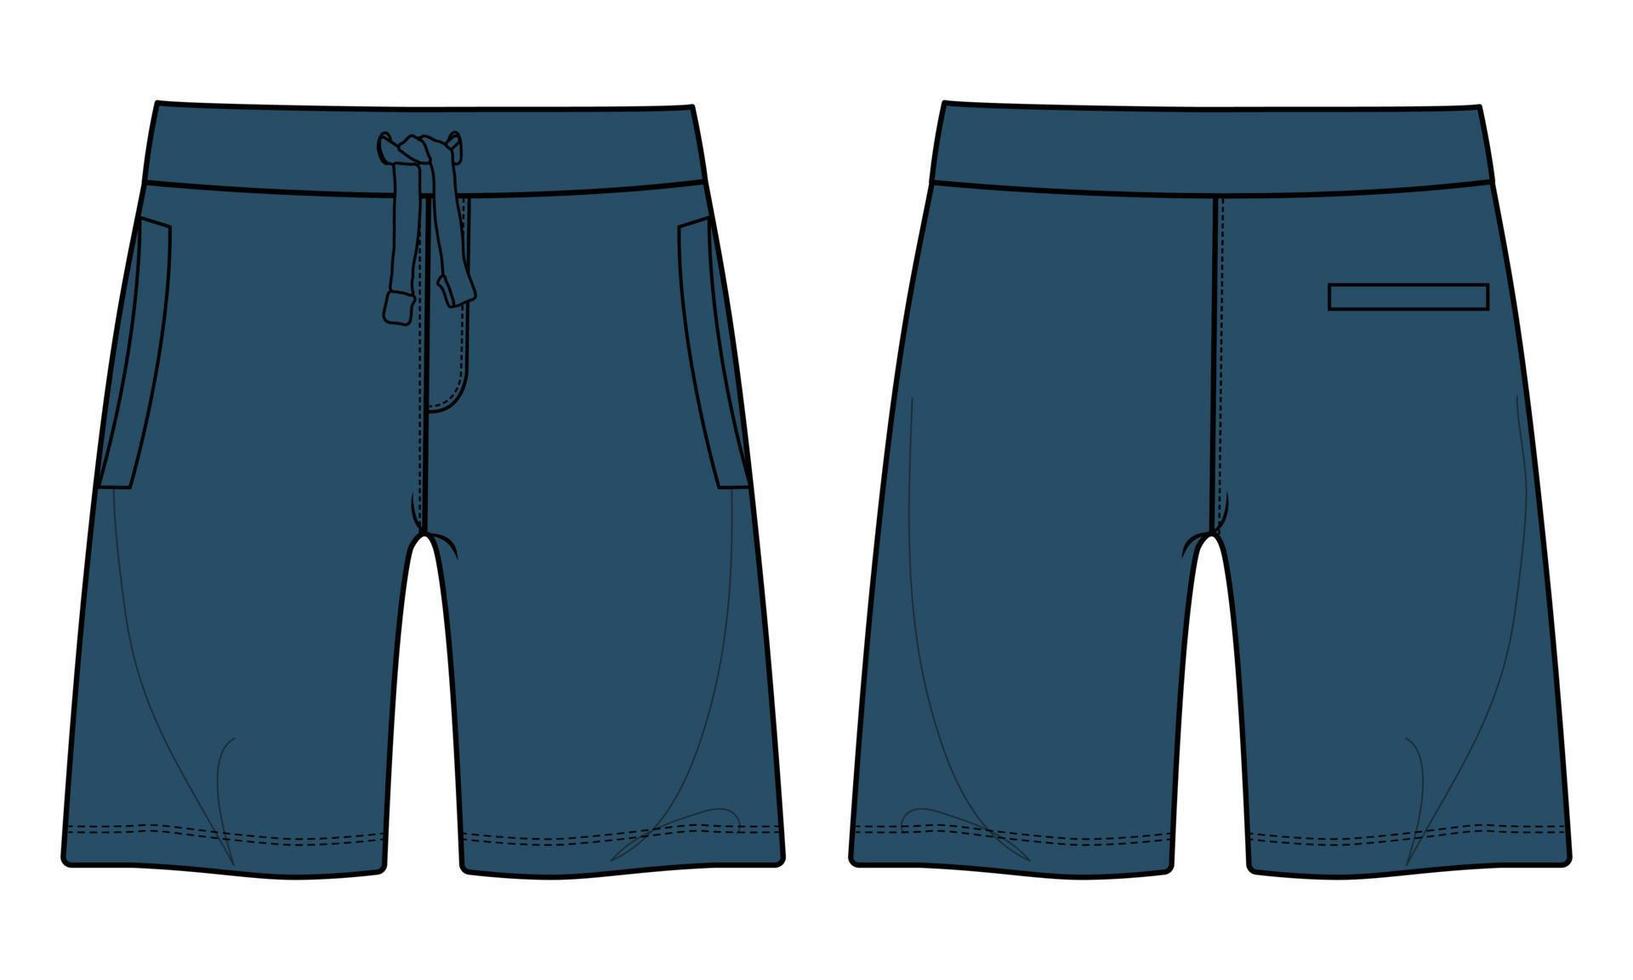 Boys Sweat shorts pant technical fashion flat sketch vector illustration navy blue color template